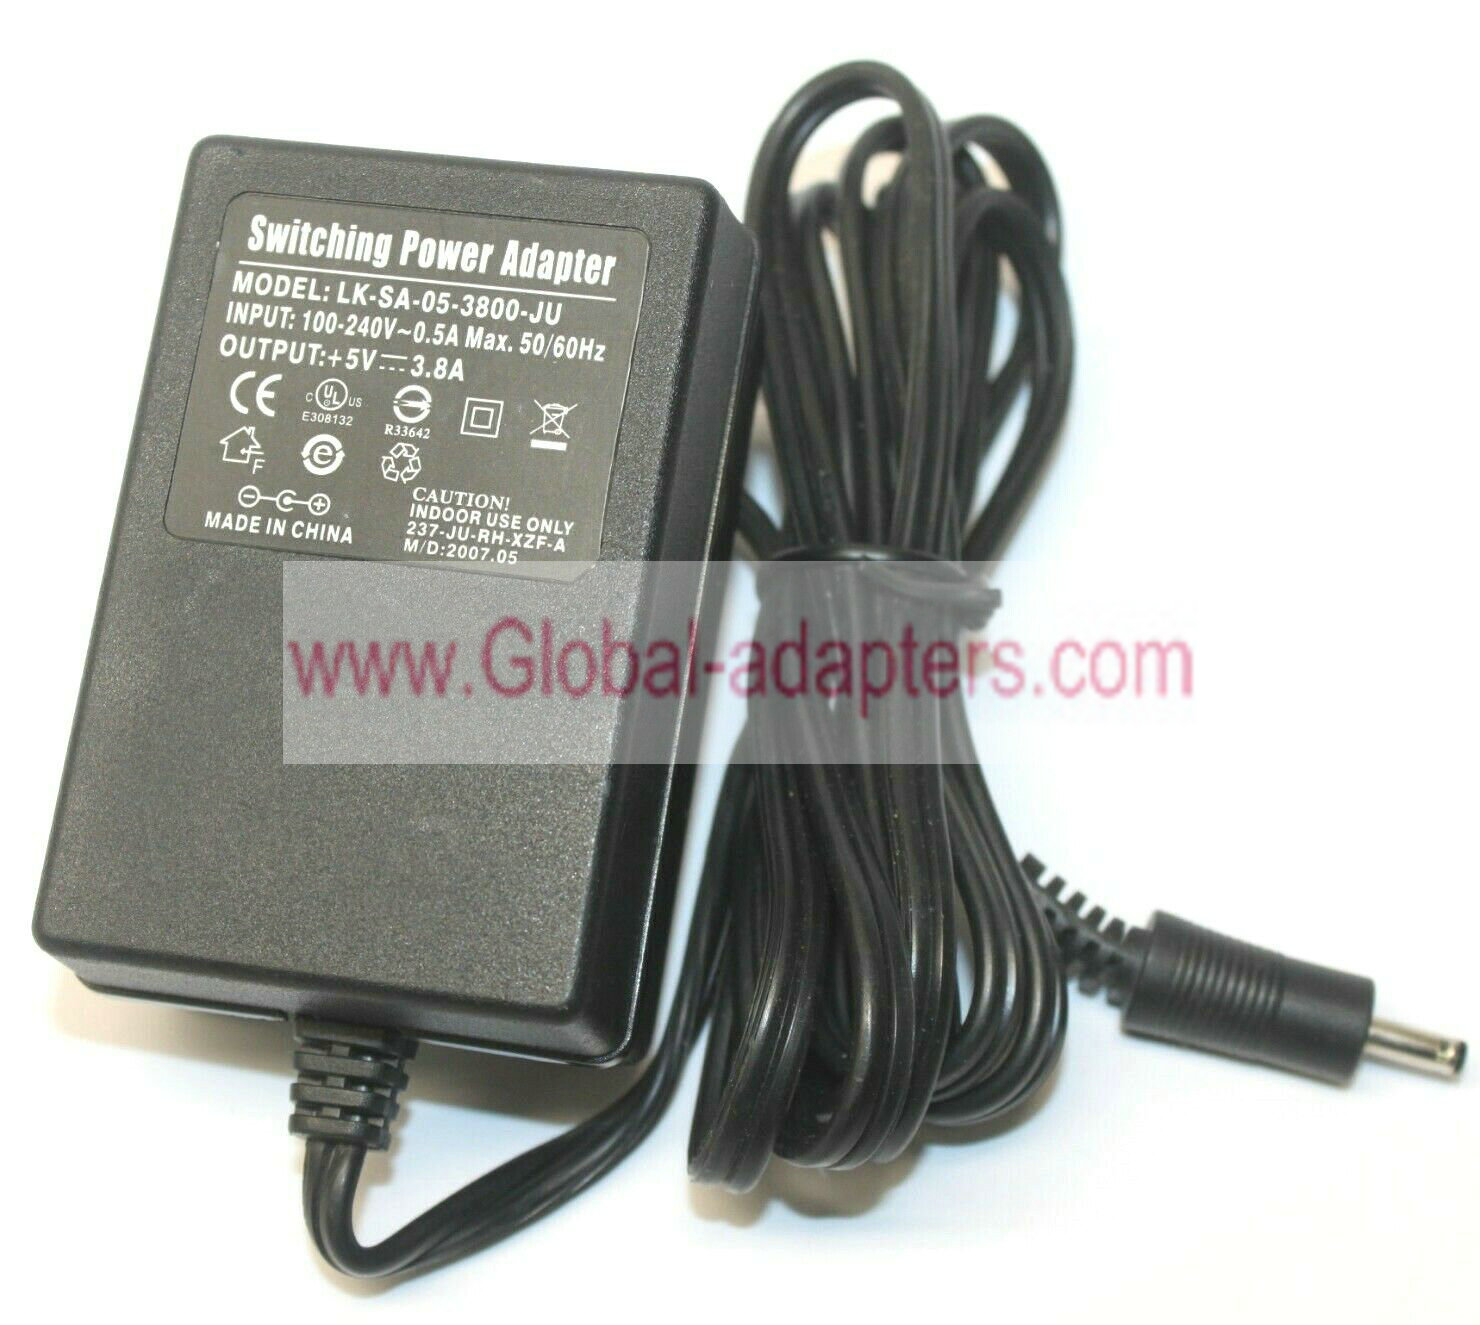 Genuine 5V 3.8A AC Adapter LK-SA-05-3800-JU Switching Power Supply Charger